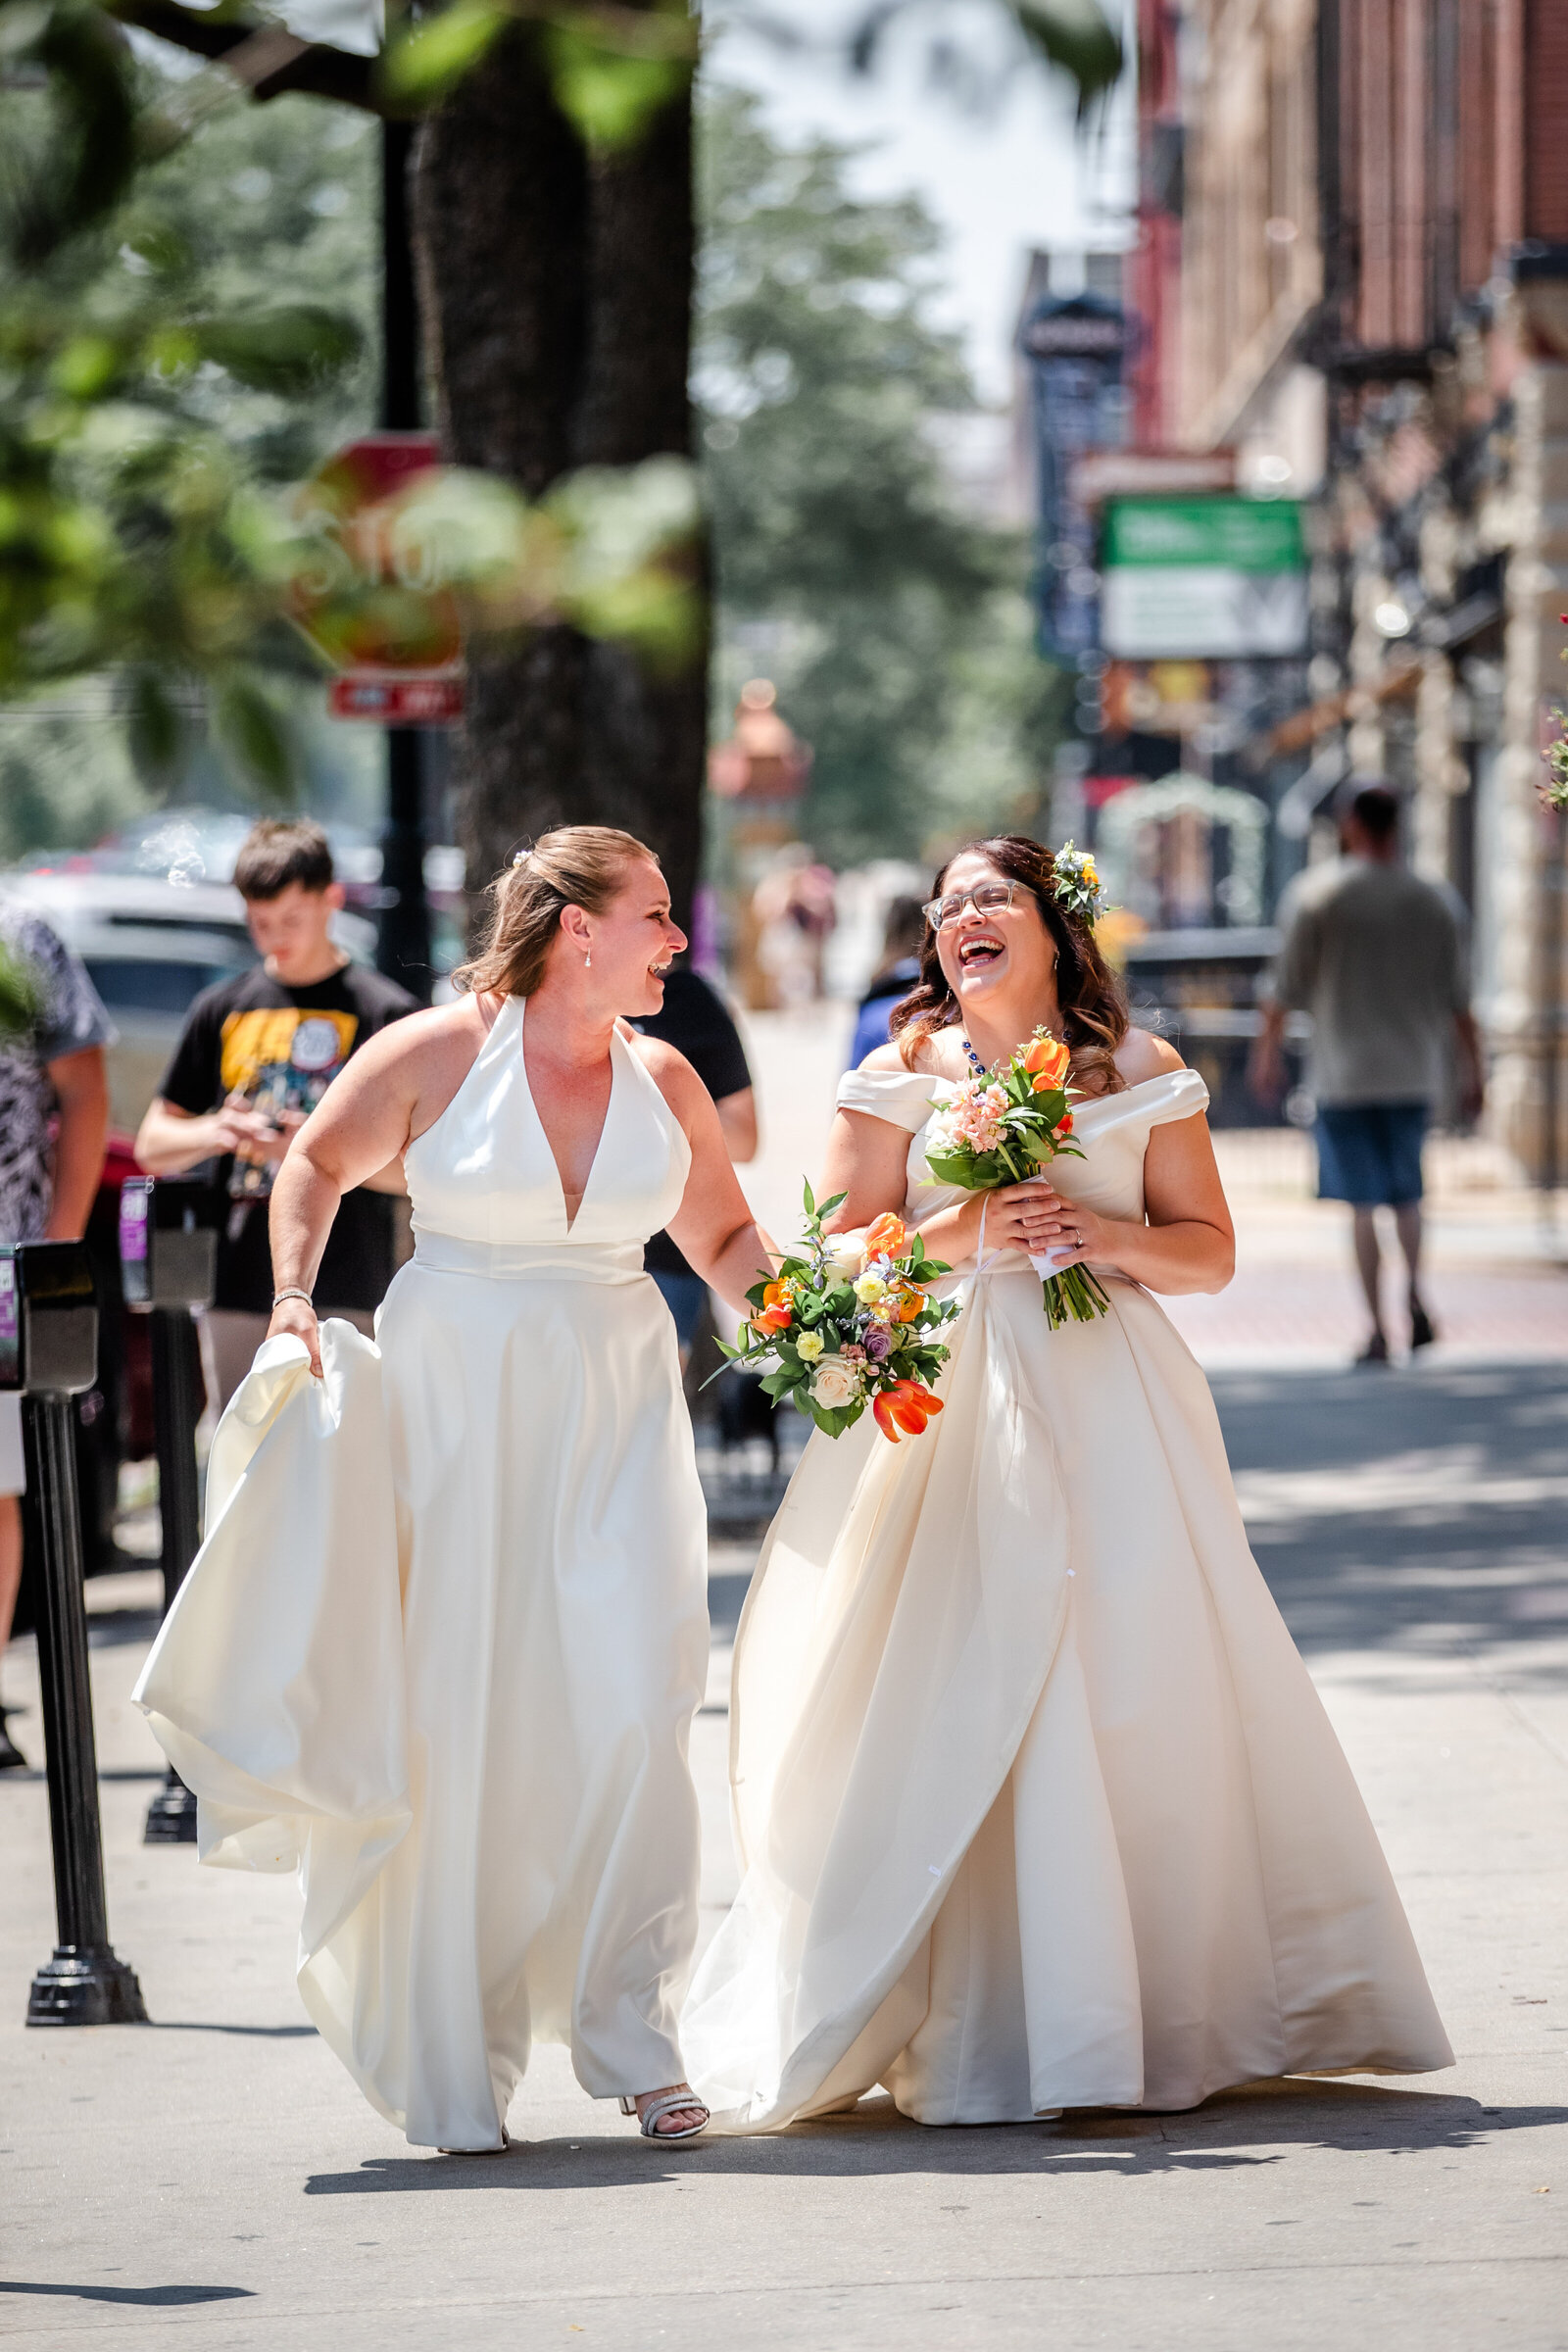 Bride and Bride walking down the Old Market in Omaha Ne